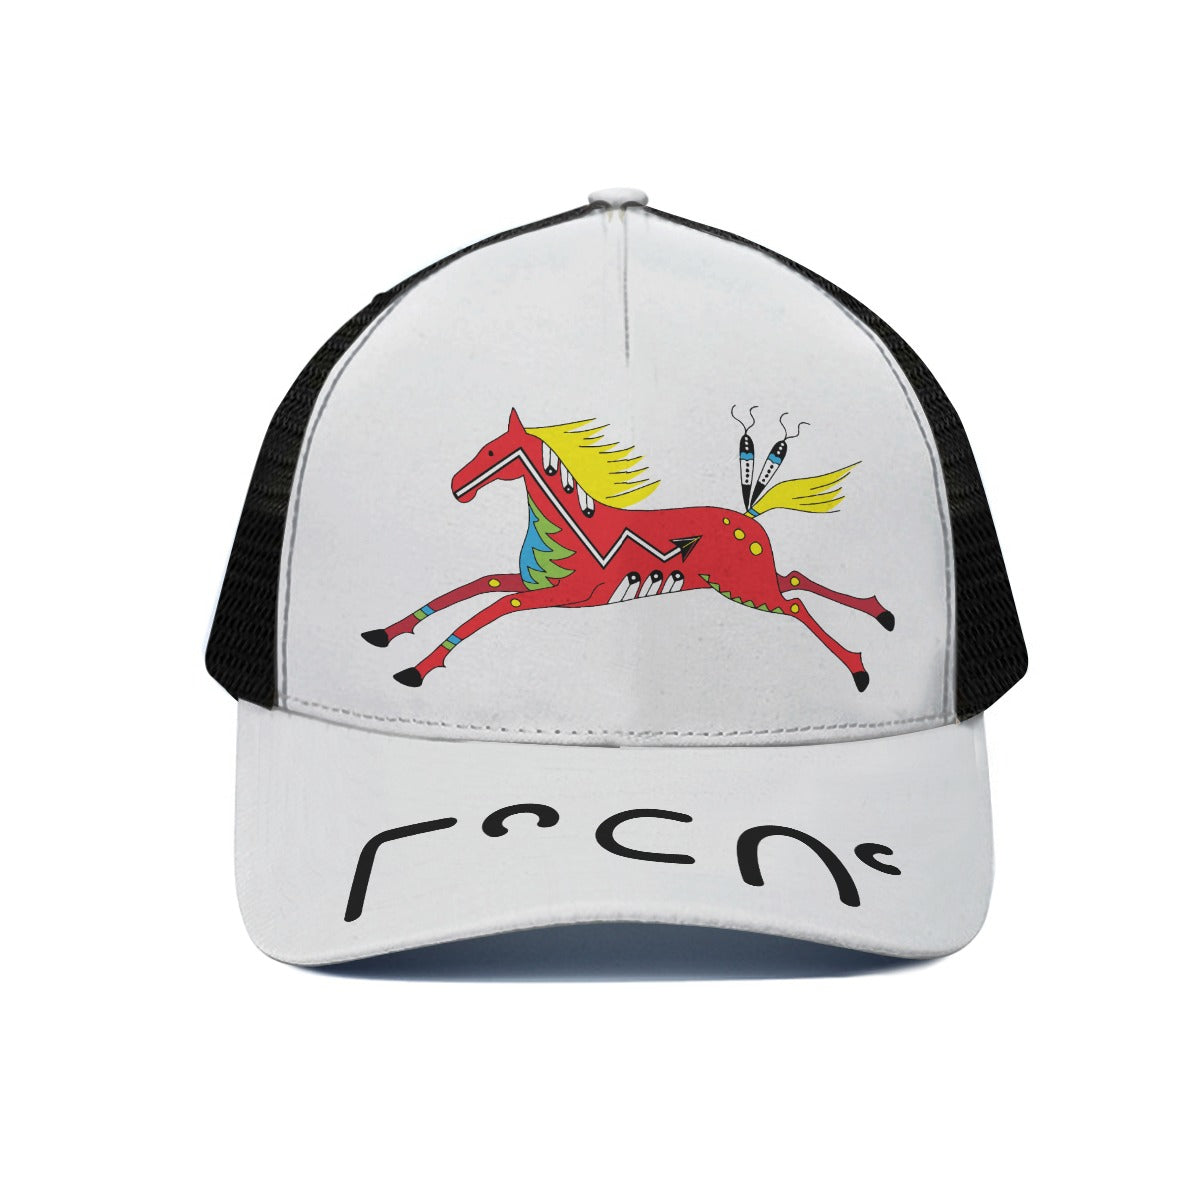 Leaping Horse Snapback Hat